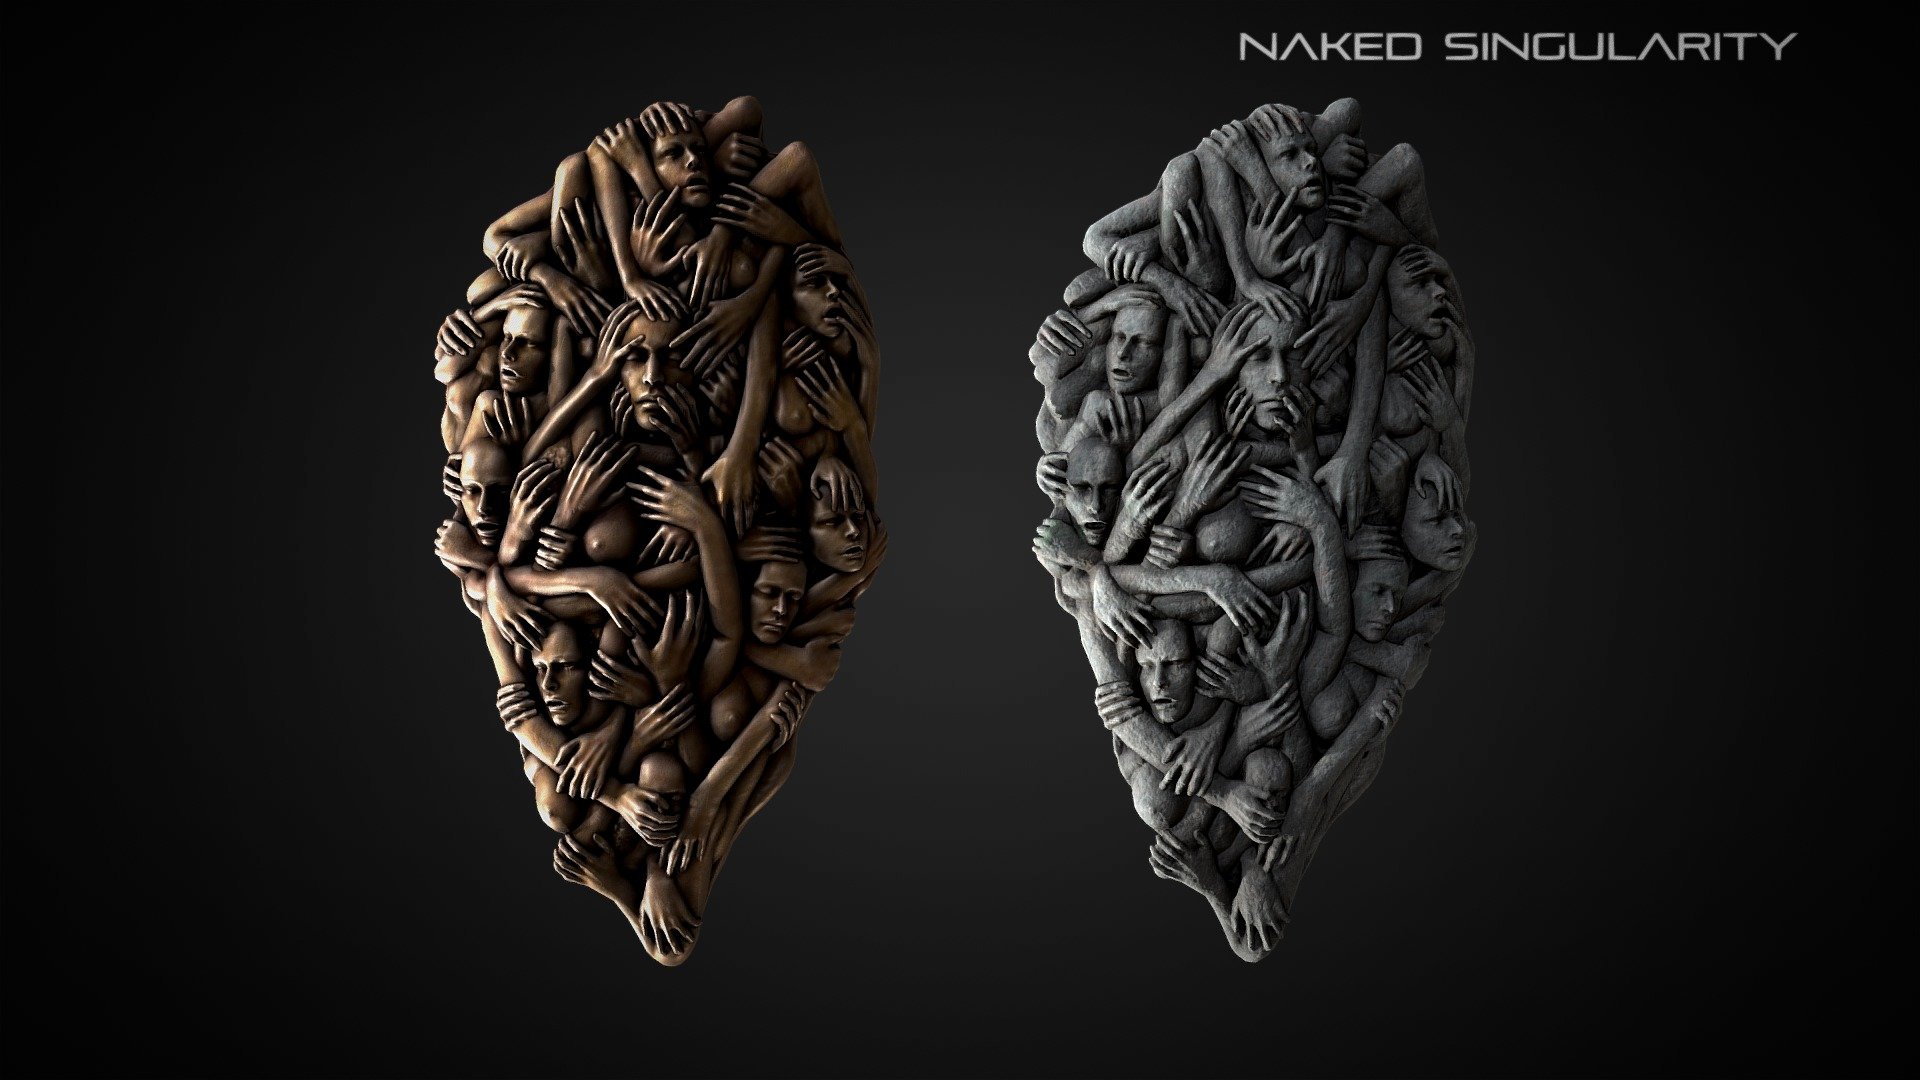 Human shield | Medieval dark fantasy weapon | 4K | Lowpoly | PBR

Original concept by Naked Singularity. Inspire by Dark Souls triology and Elden Ring




High quality low poly model.

4K High resolution texture.

Real world scale.

PBR texturing.

Check out other Dark fantasy game asset

Customer support: nakedsingularity.studio@gmail.com

Follow us on: Youtube | Facebook | Instagram | Twitter | Artstation - Human shield | Medieval dark fantasy weapon - Buy Royalty Free 3D model by Naked Singularity Studio (@nakedsingularity) 3d model